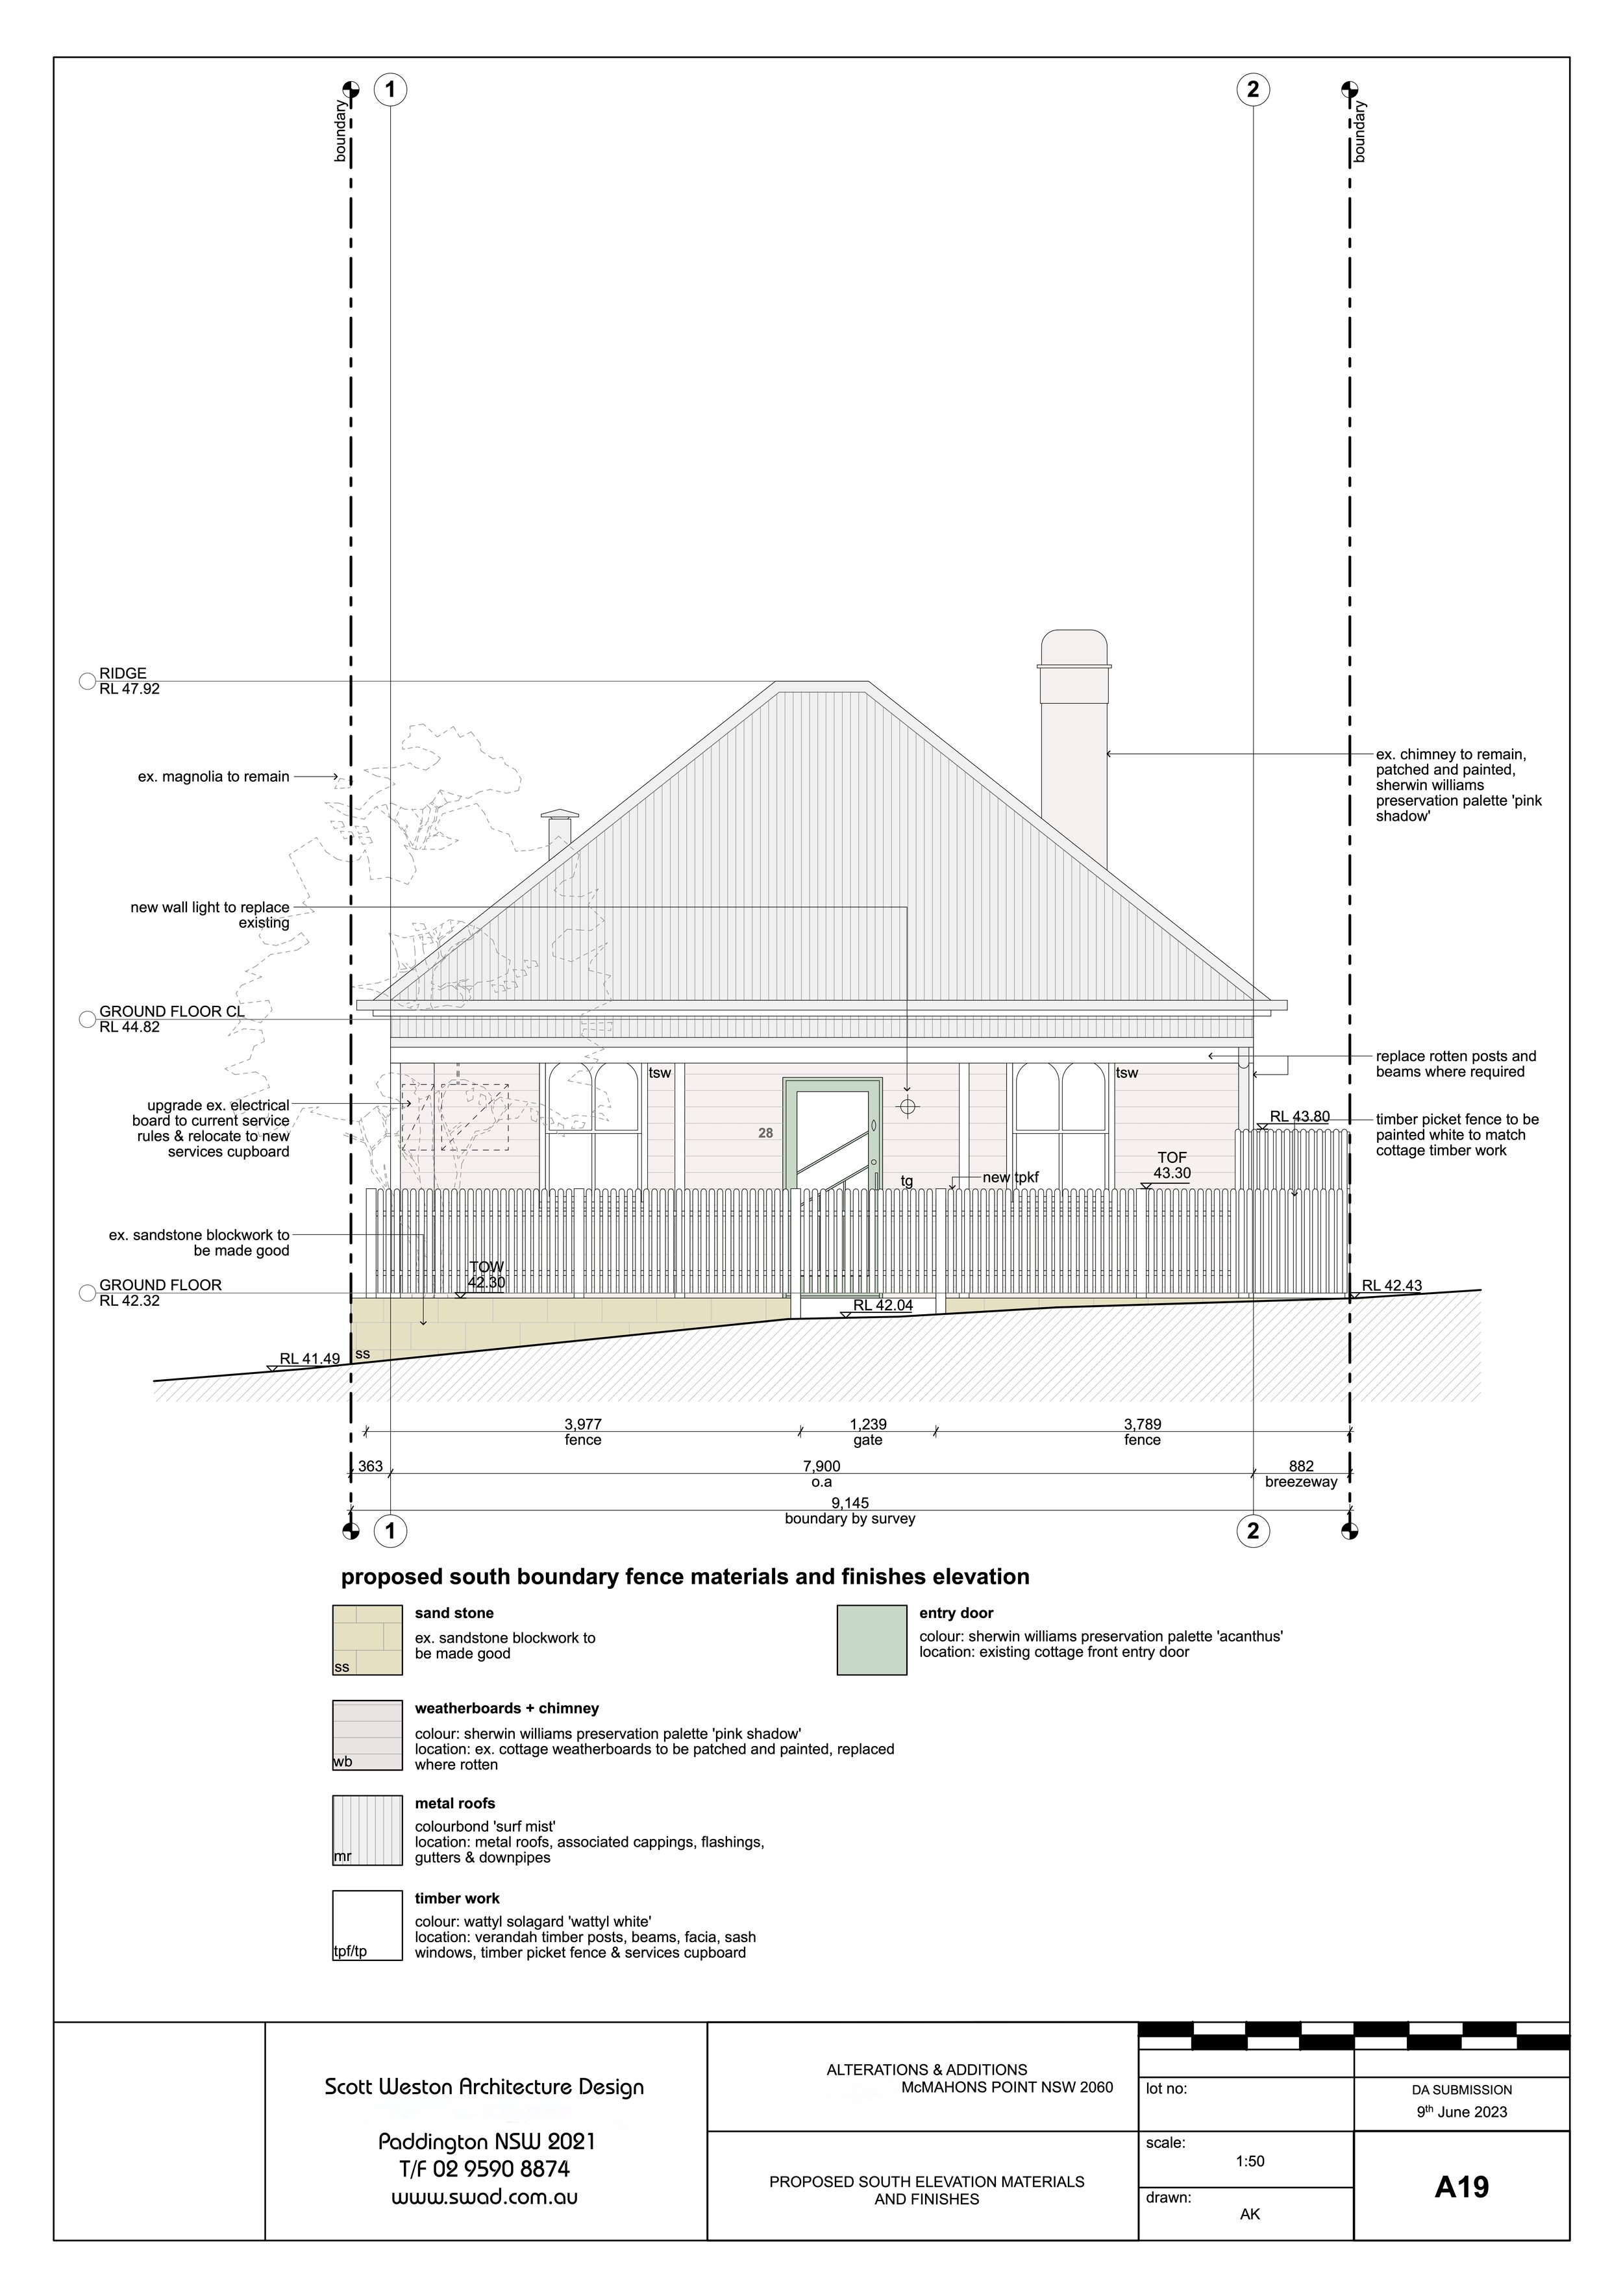 A19 PROPOSED SOUTH ELEVATION MATERIALS AND FINISHES.jpg